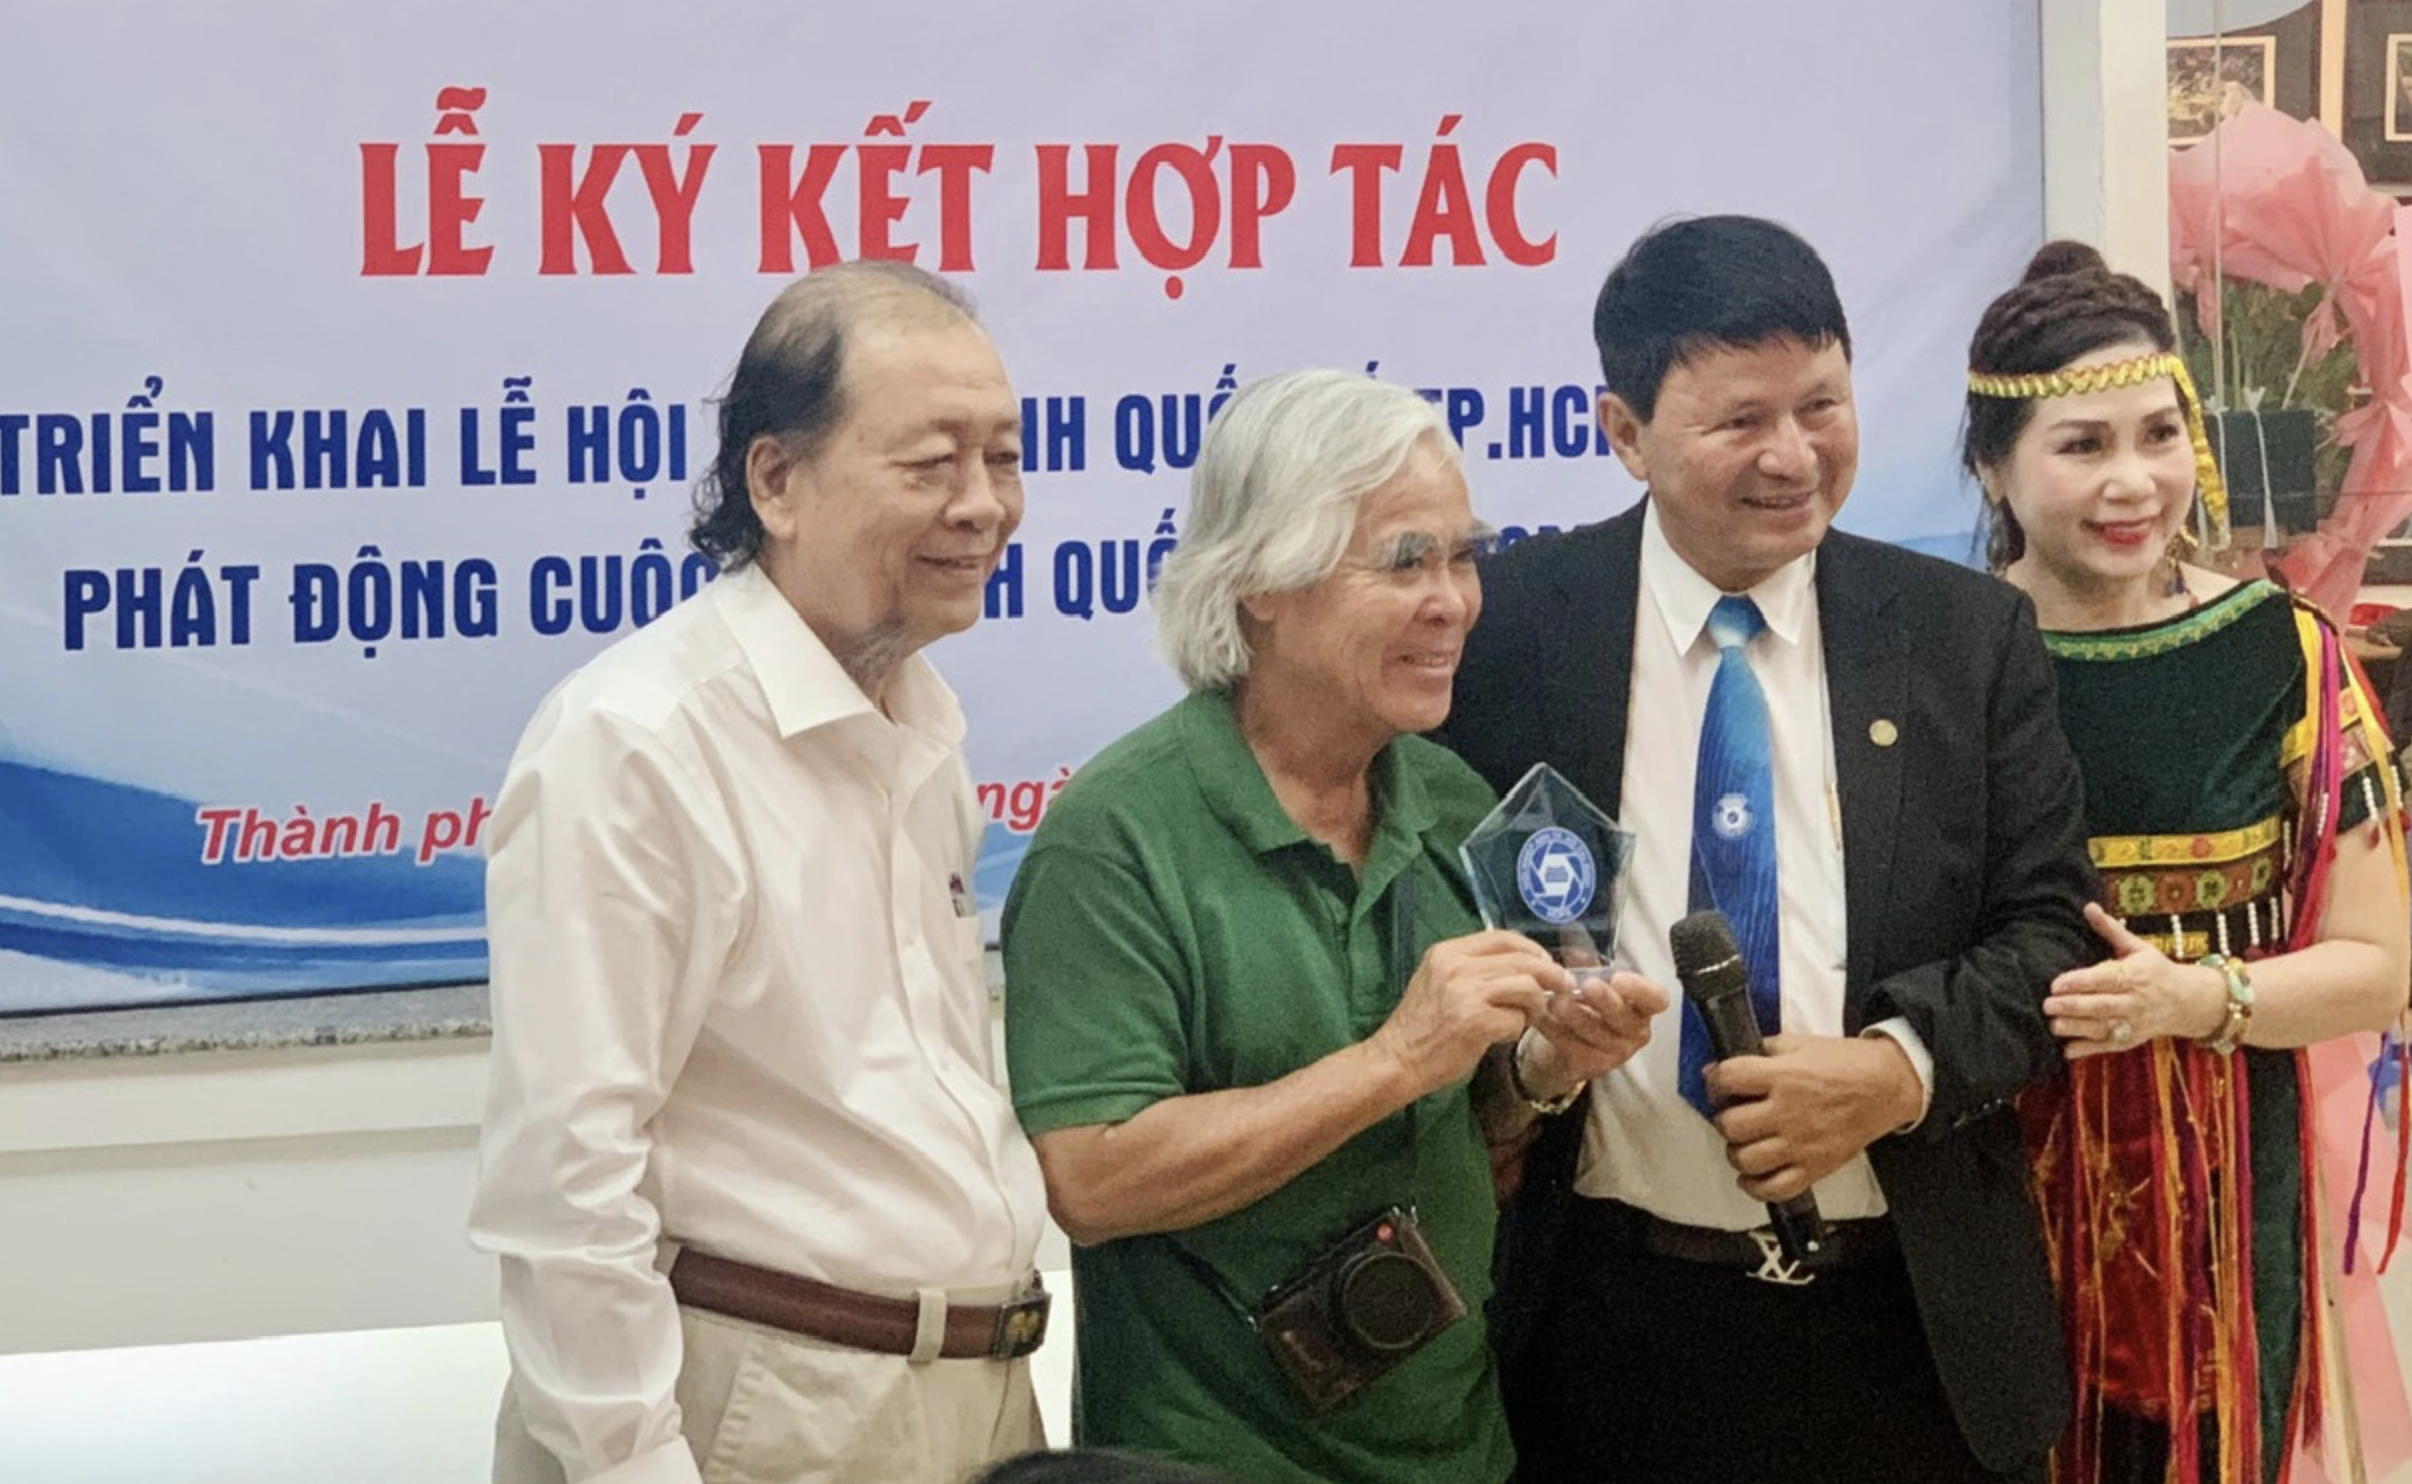 Nick Ut to attend photography fest in Ho Chi Minh City this November